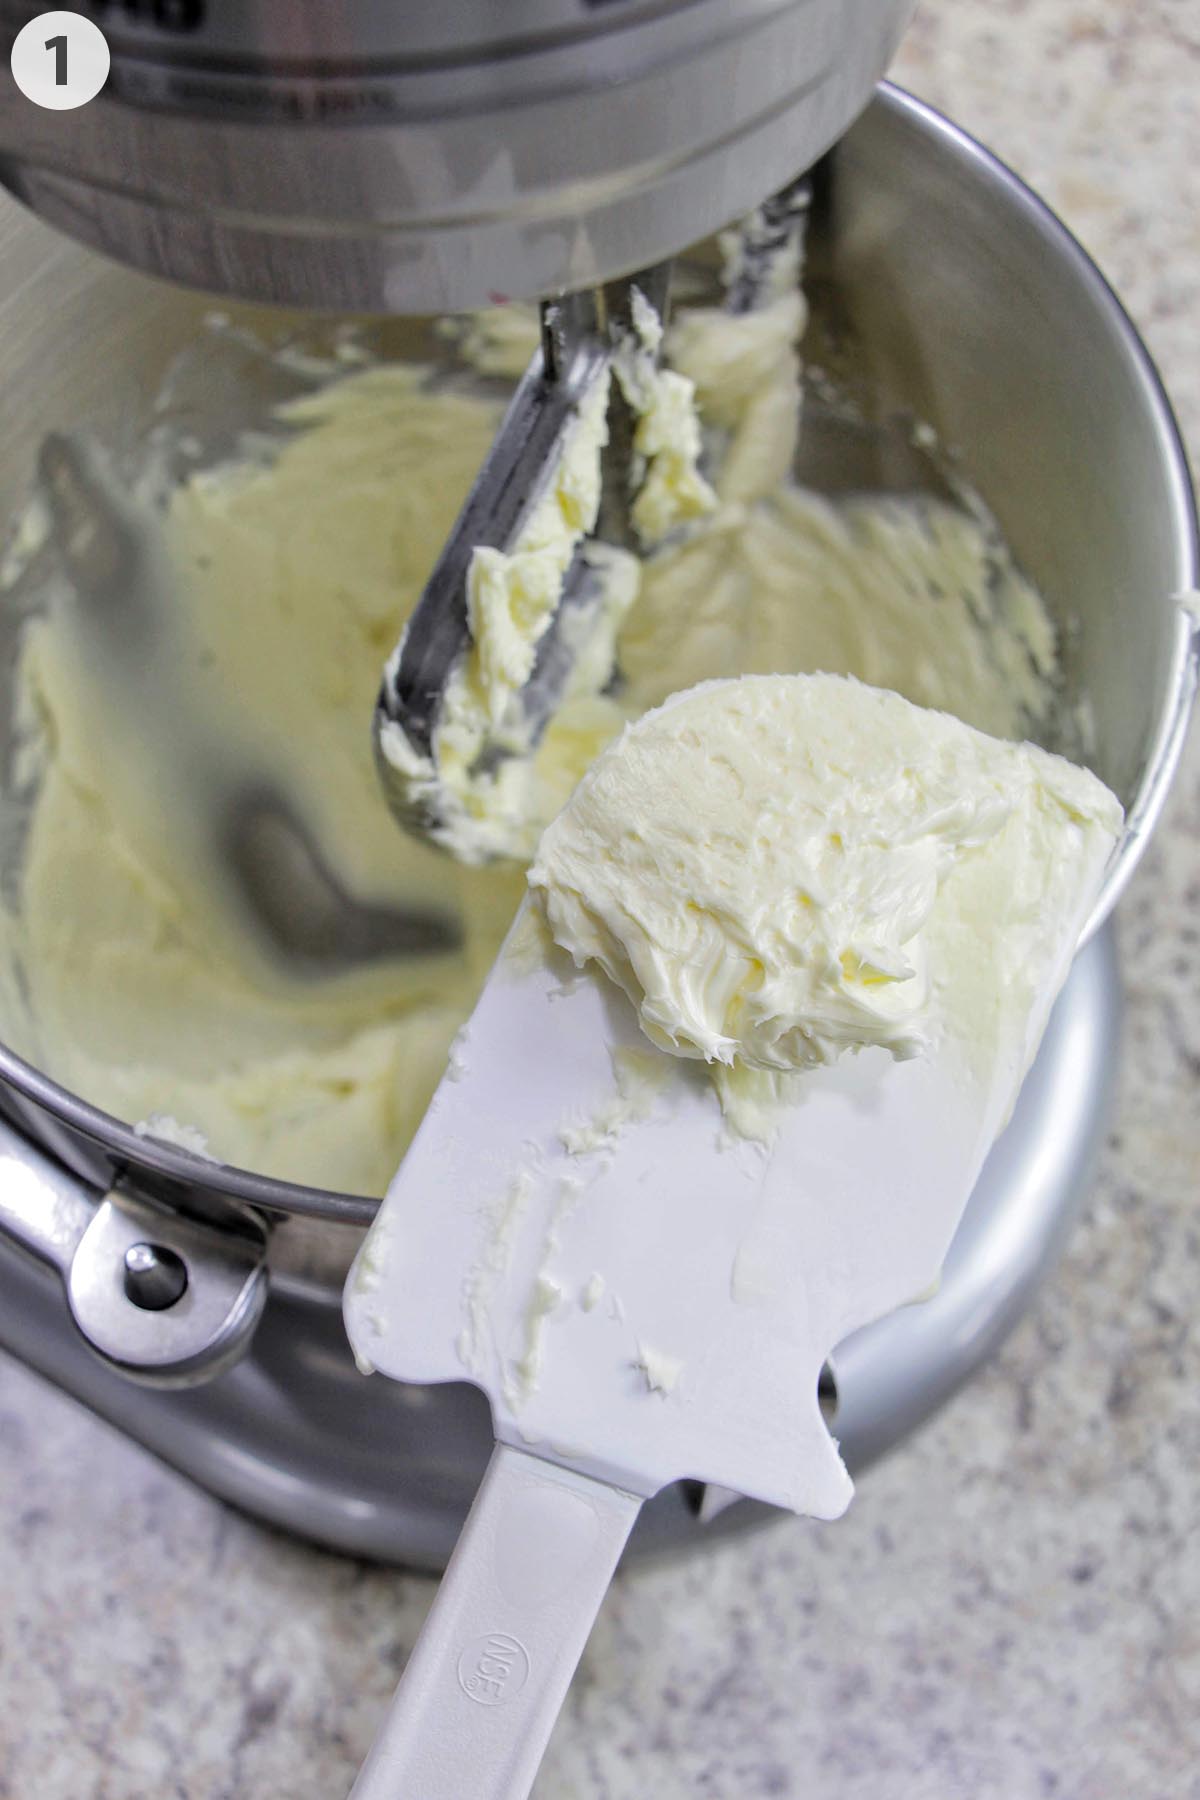 numbered photos showing properly creamed butter.